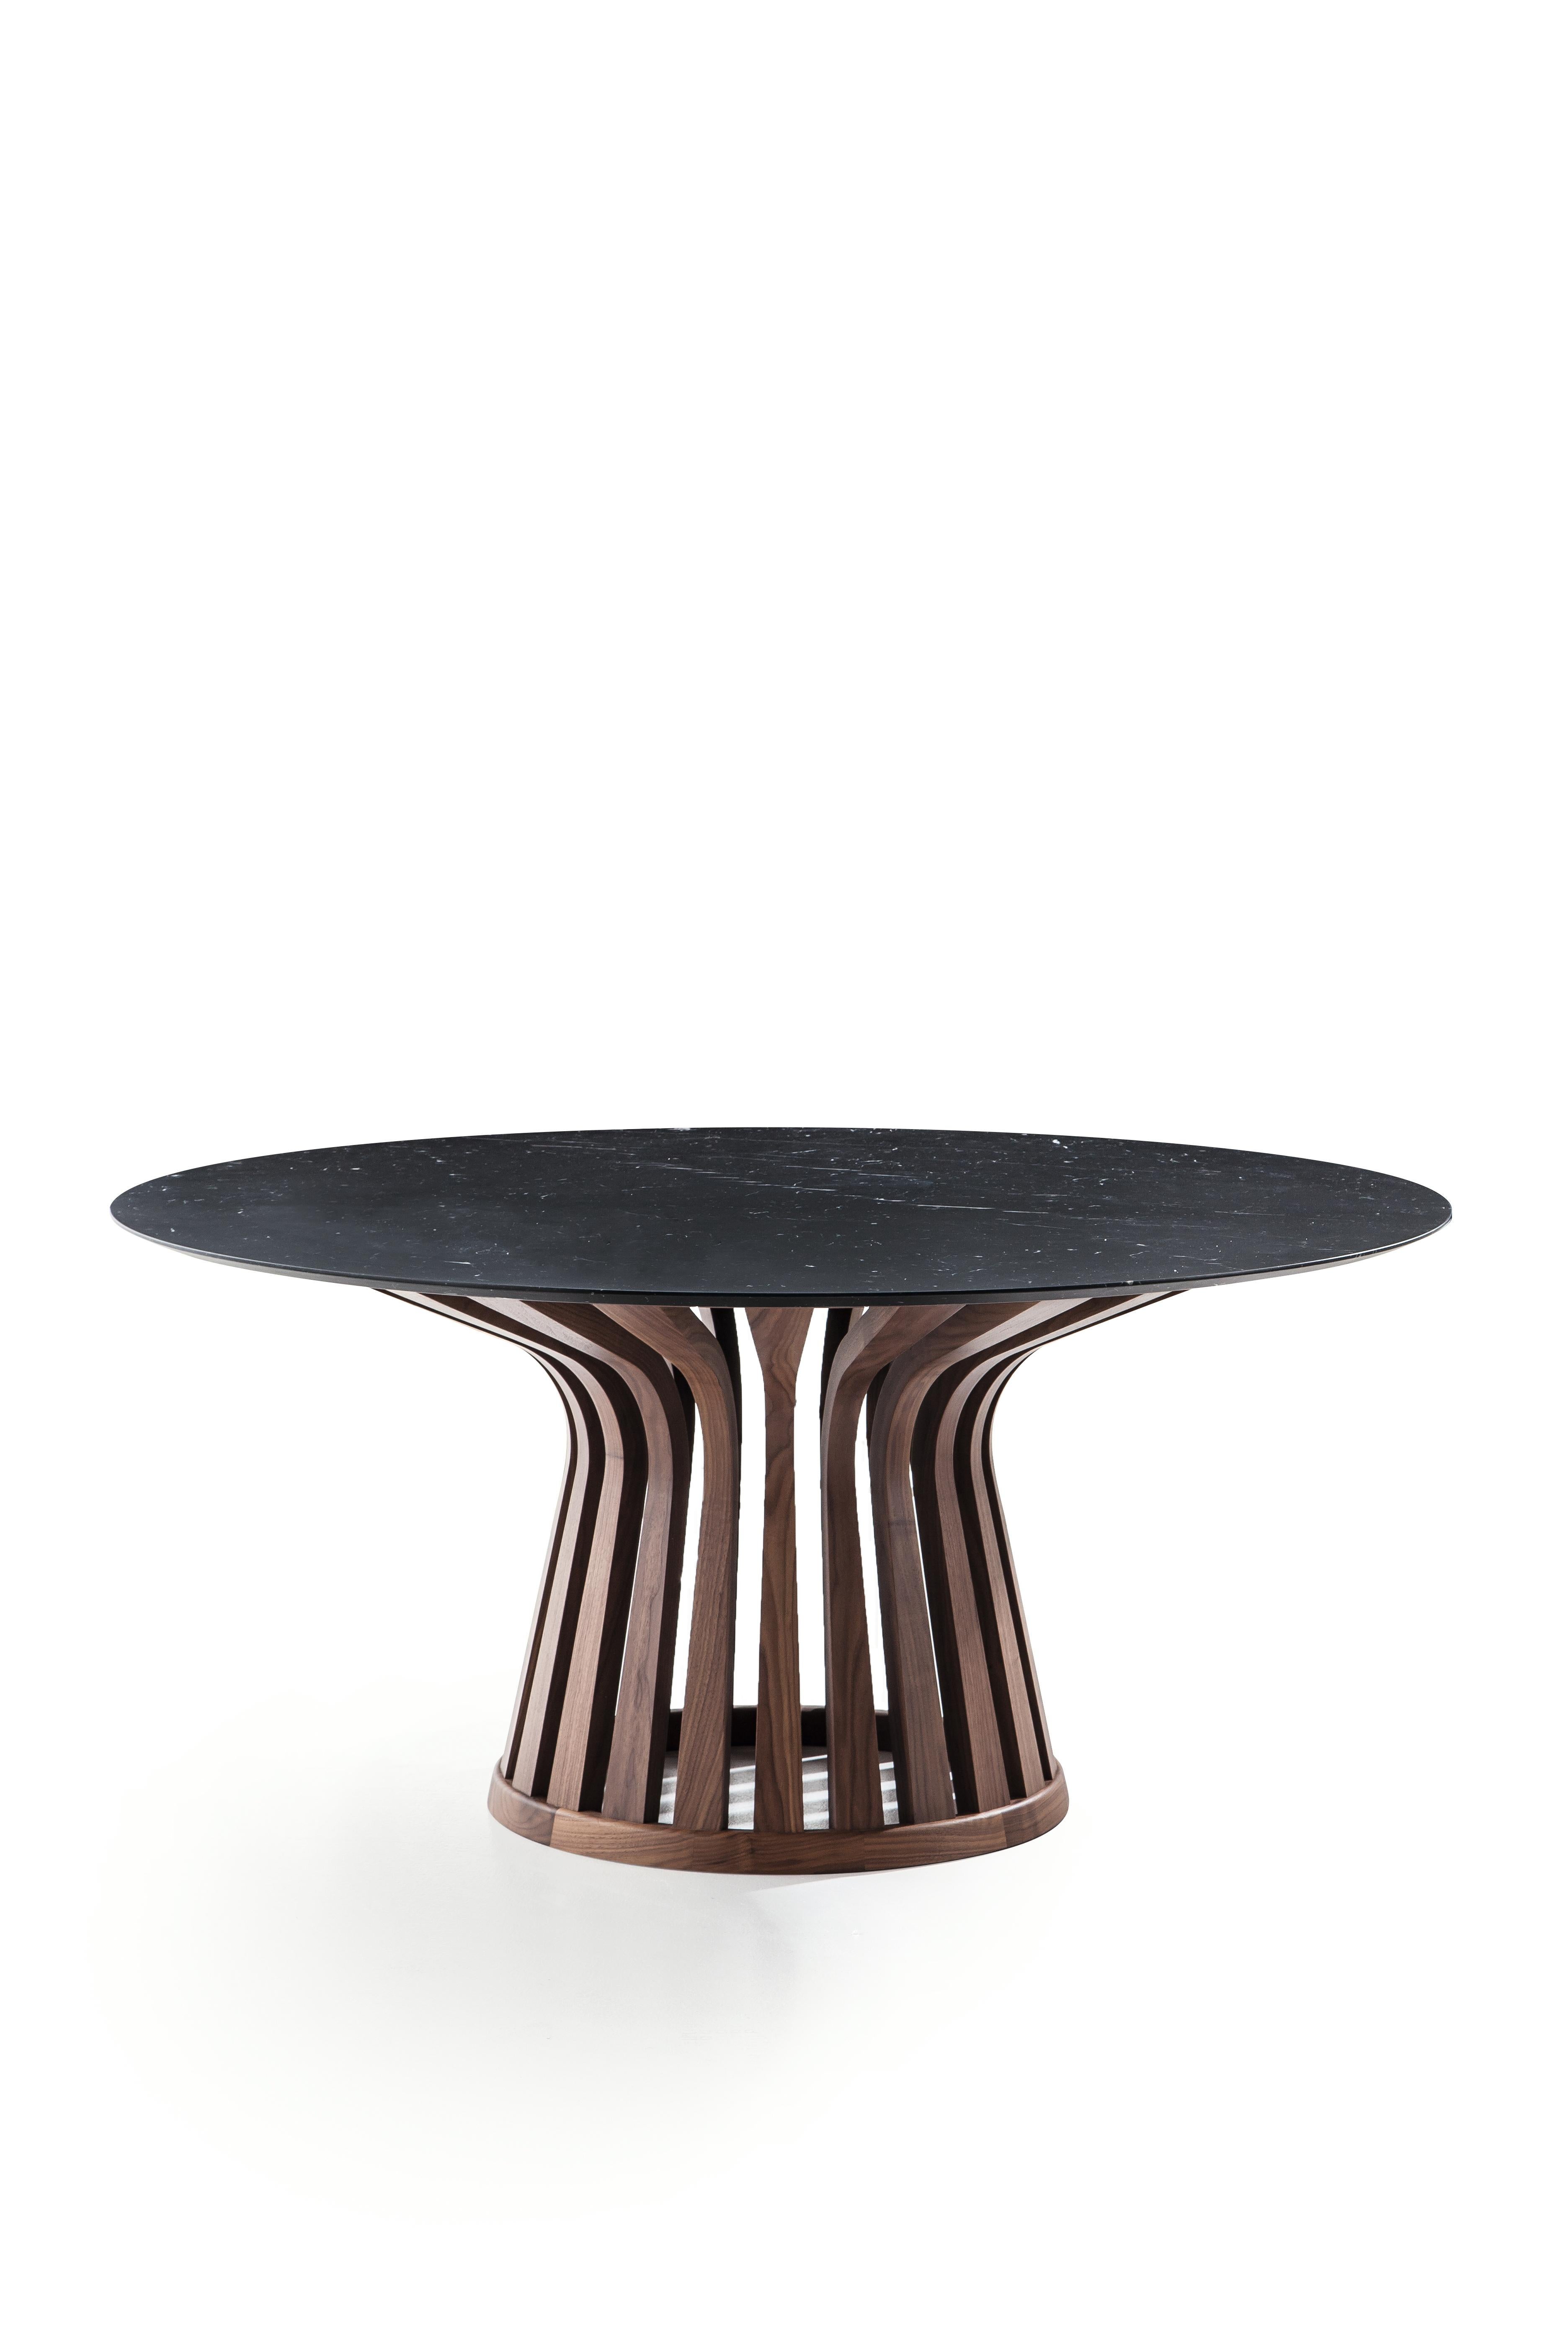 Lebeau Wood Table by Patrick Jouin  For Sale 2